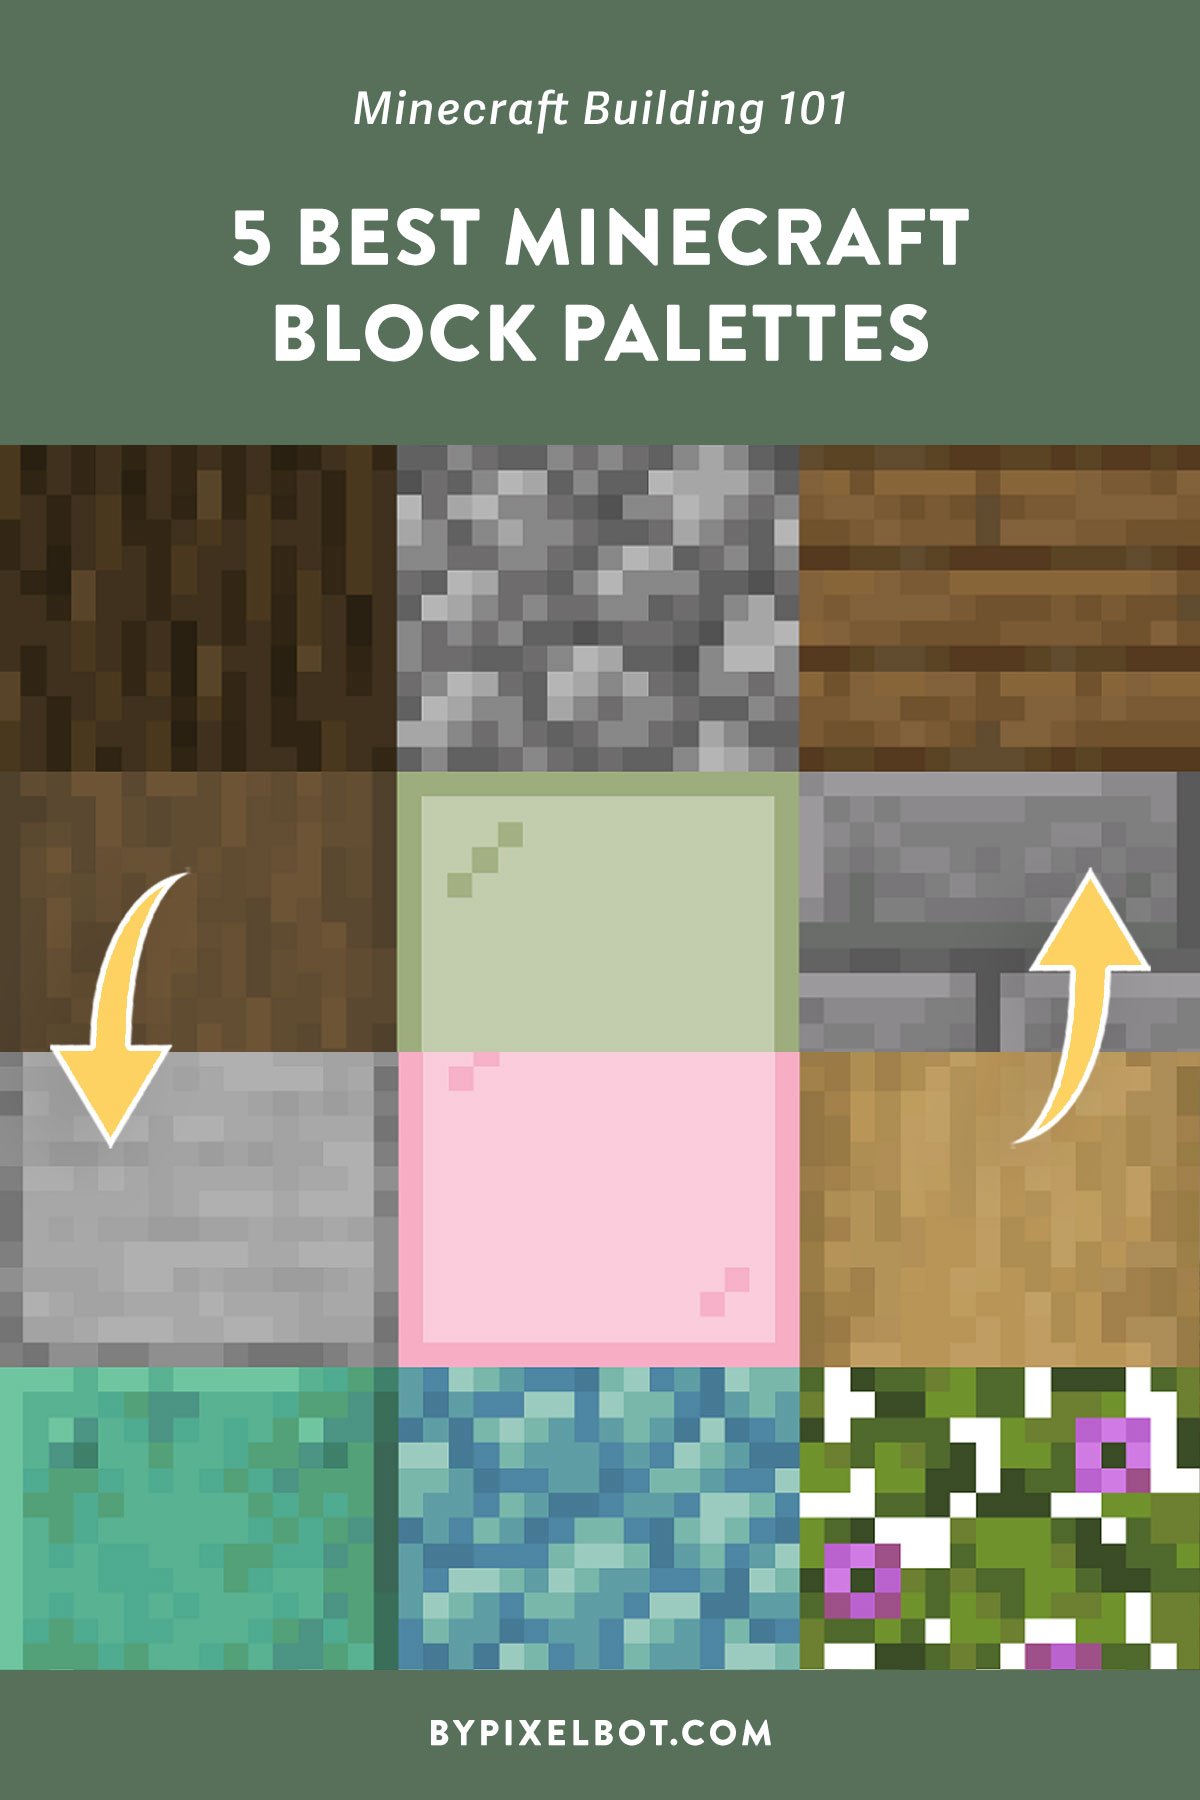 5 Best Minecraft Block Palettes to Consider for Your Next Build — ByPixelbot